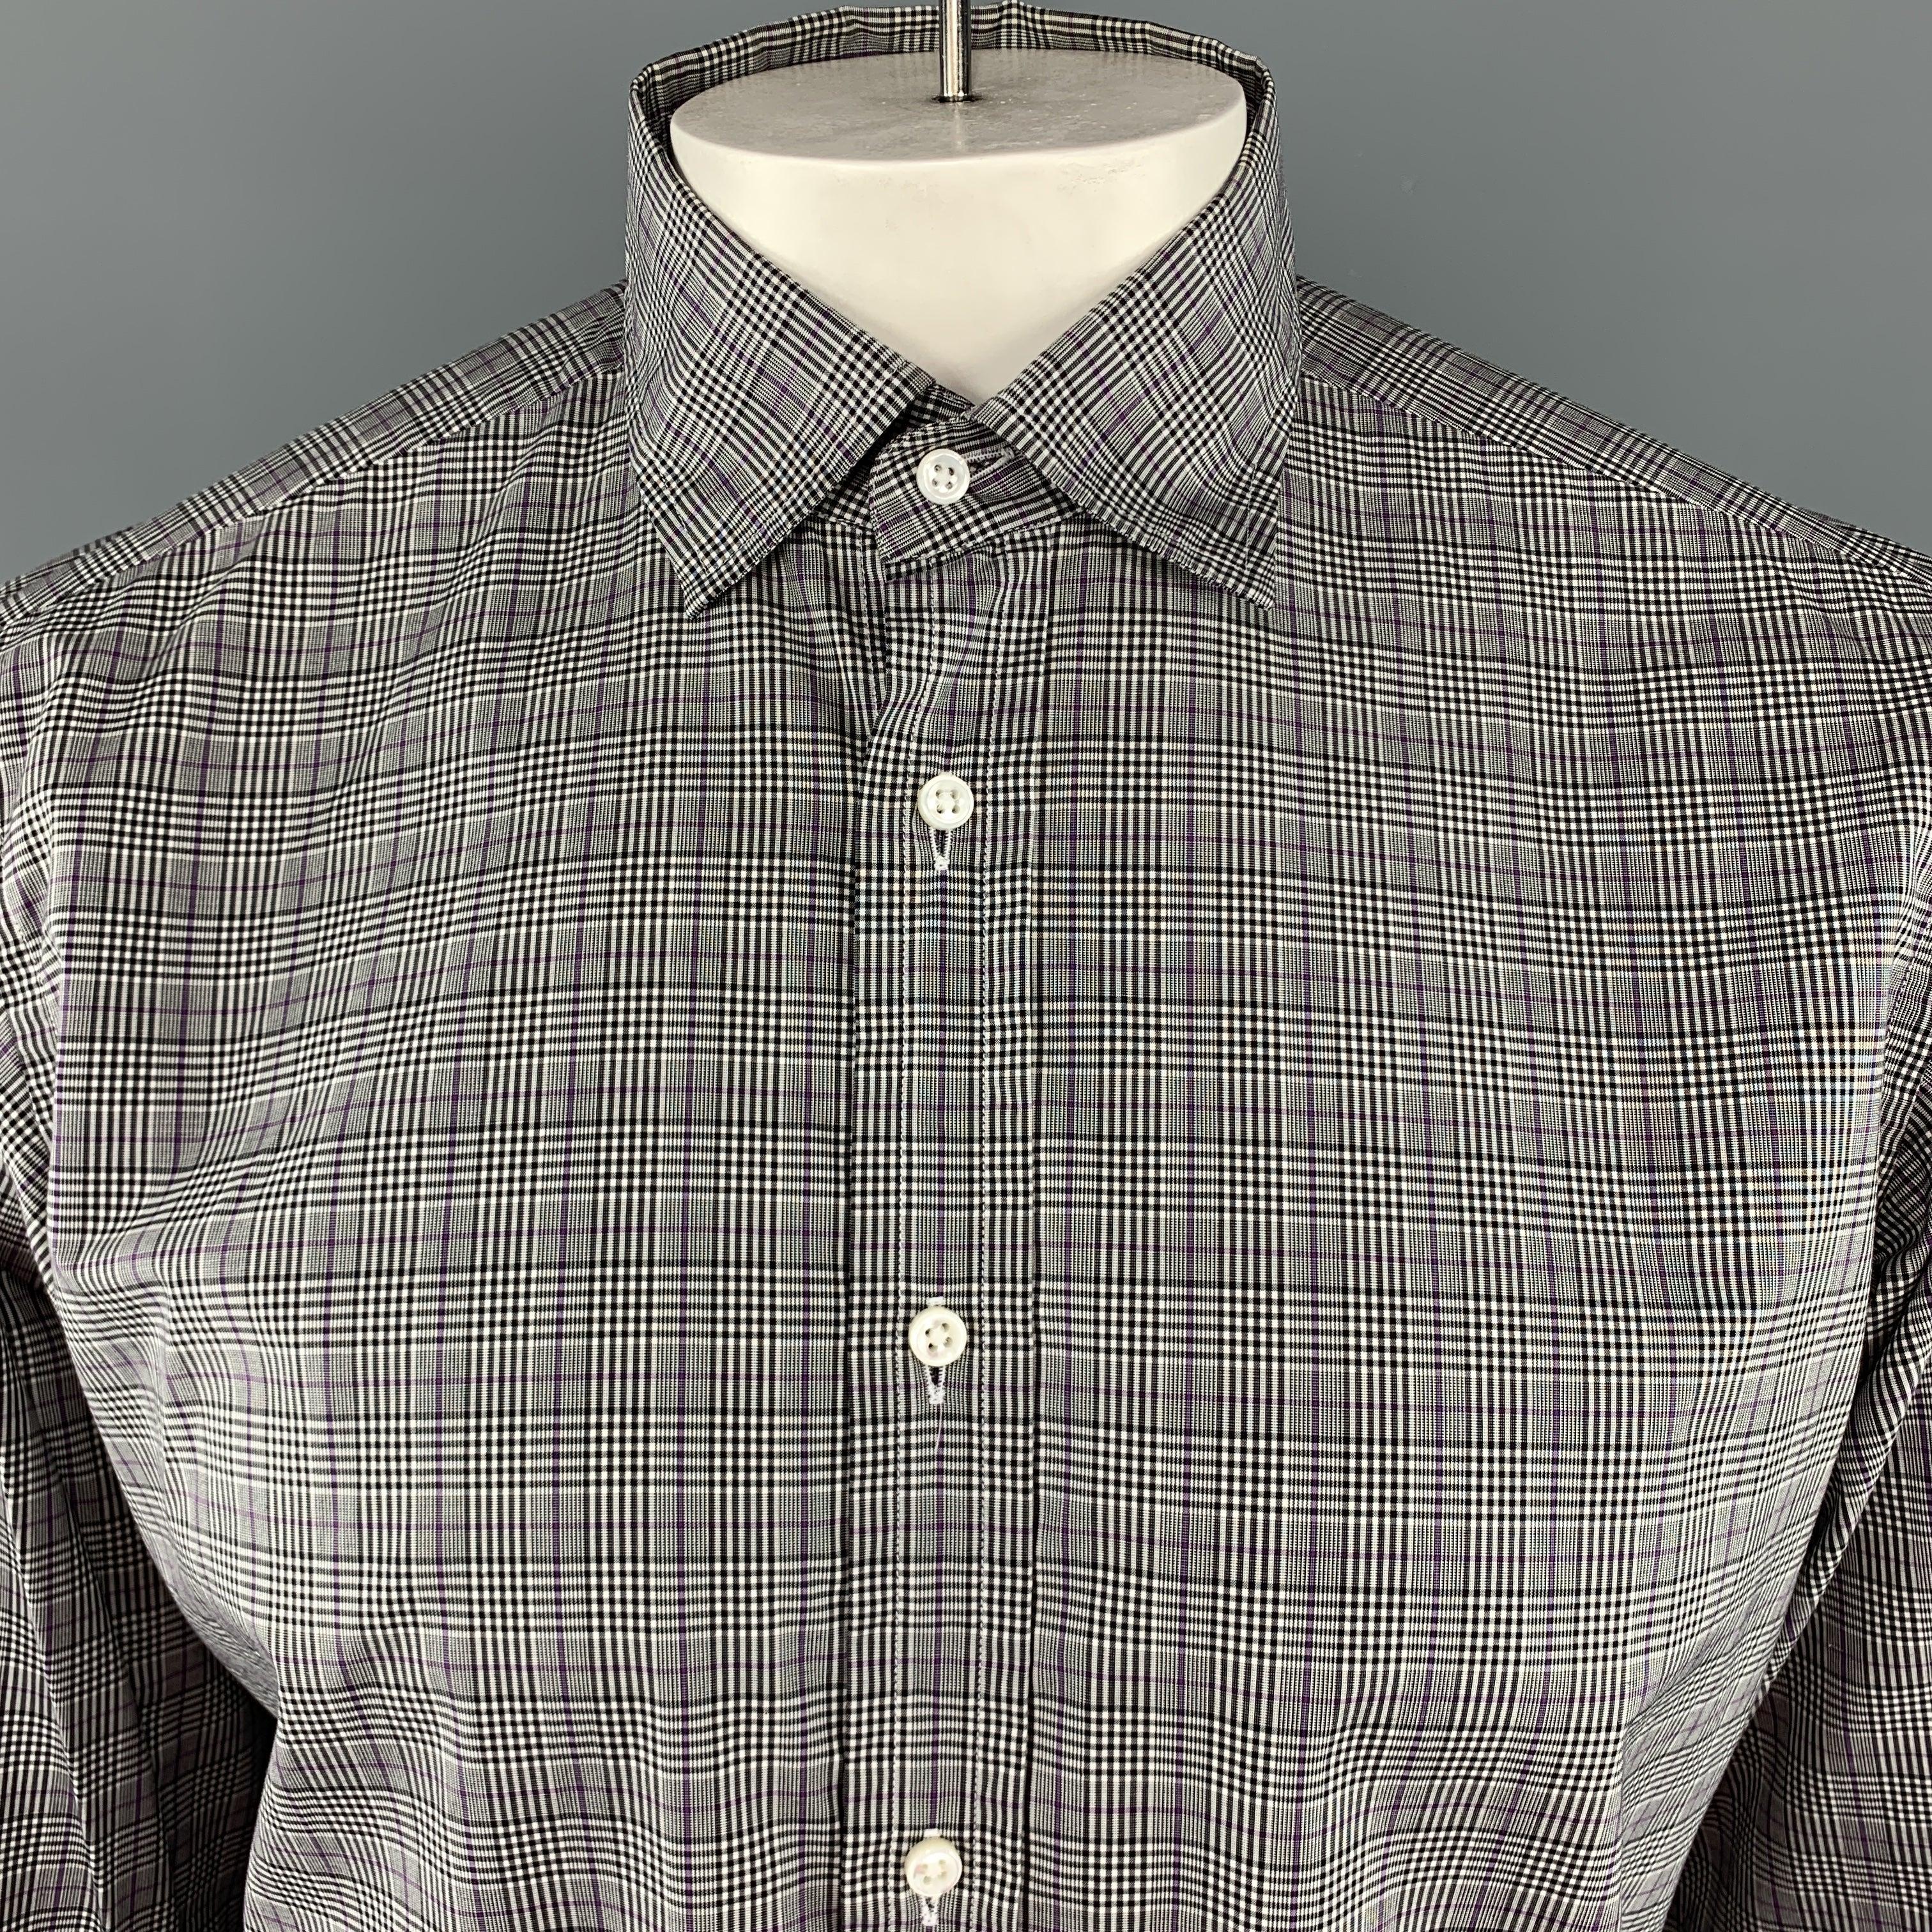 RALPH LAUREN PURPLE LABEL
Long Sleeve Shirt comes in black and white tones in a plaid cotton material, with a pointed collar, buttoned cuffs, button up. Made in Italy.Excellent Pre-Owned Condition. 

Marked:   M 

Measurements: 
 
Shoulder: 16.5